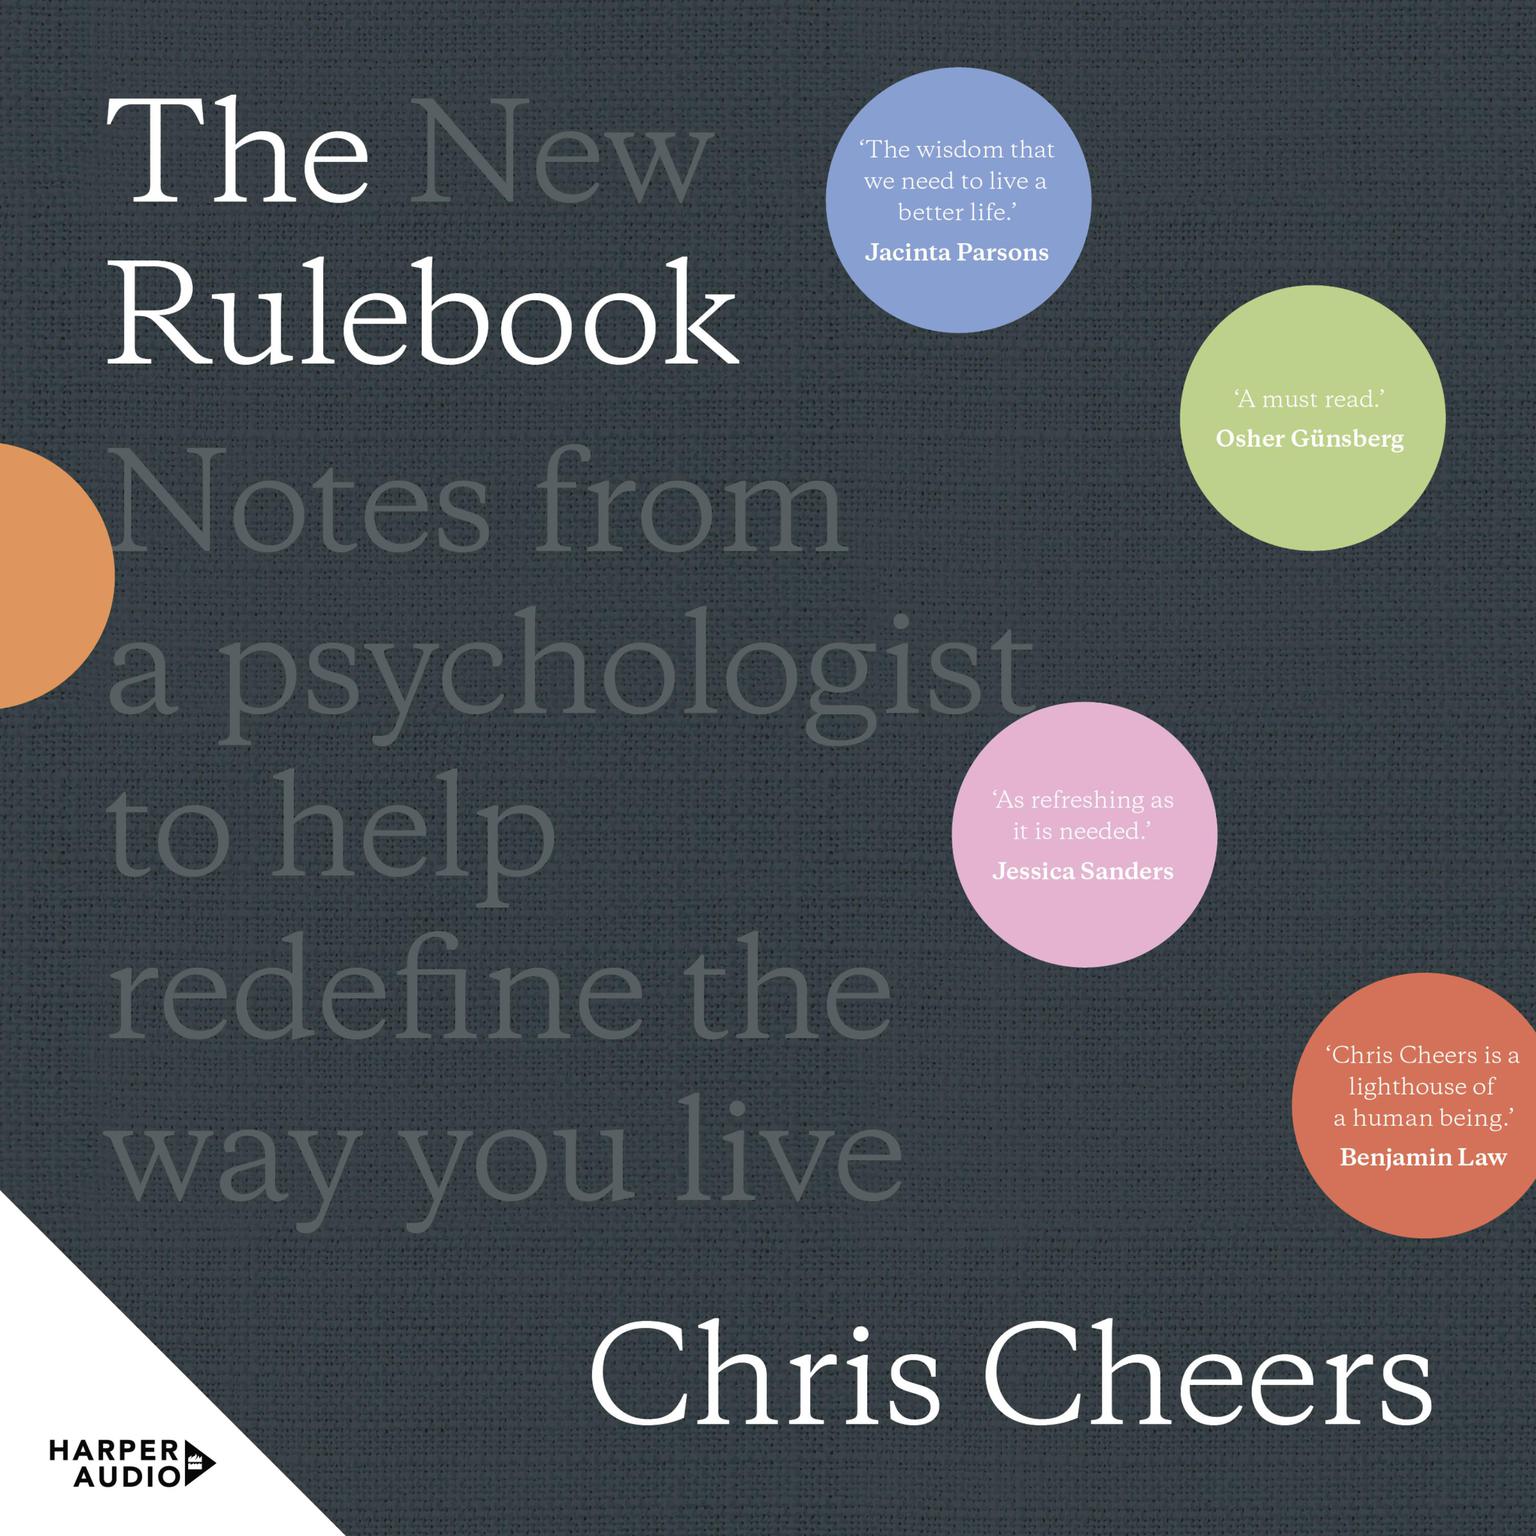 The New Rulebook: Notes from a psychologist to help redefine the way you live, for fans of Glennon Doyle, Brene Brown, Elizabeth Gilbert and Julie Smith Audiobook, by Chris Cheers